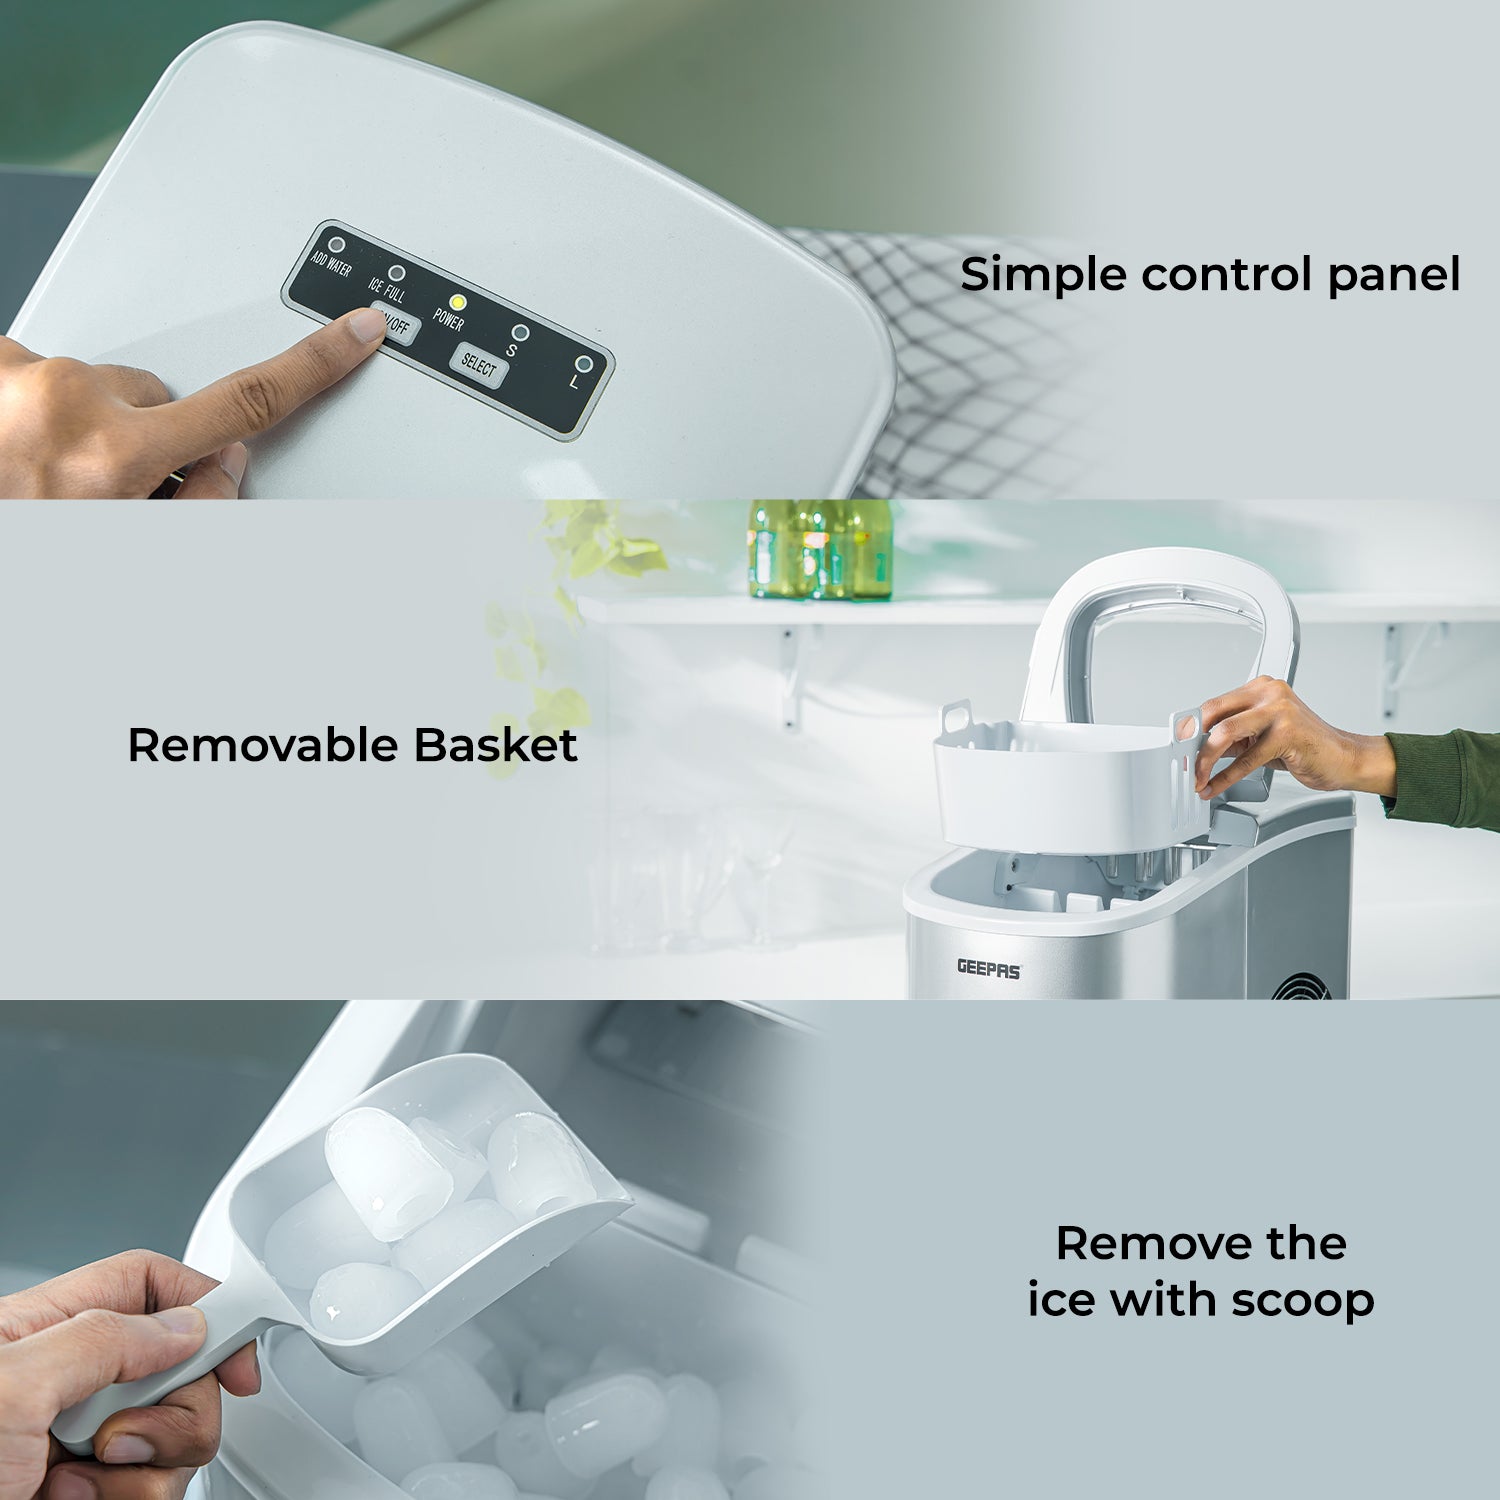 This image shows off the main features of the silver ice cube making machine, firstly the simple control panel, the removable basket, and a special ice scoop.